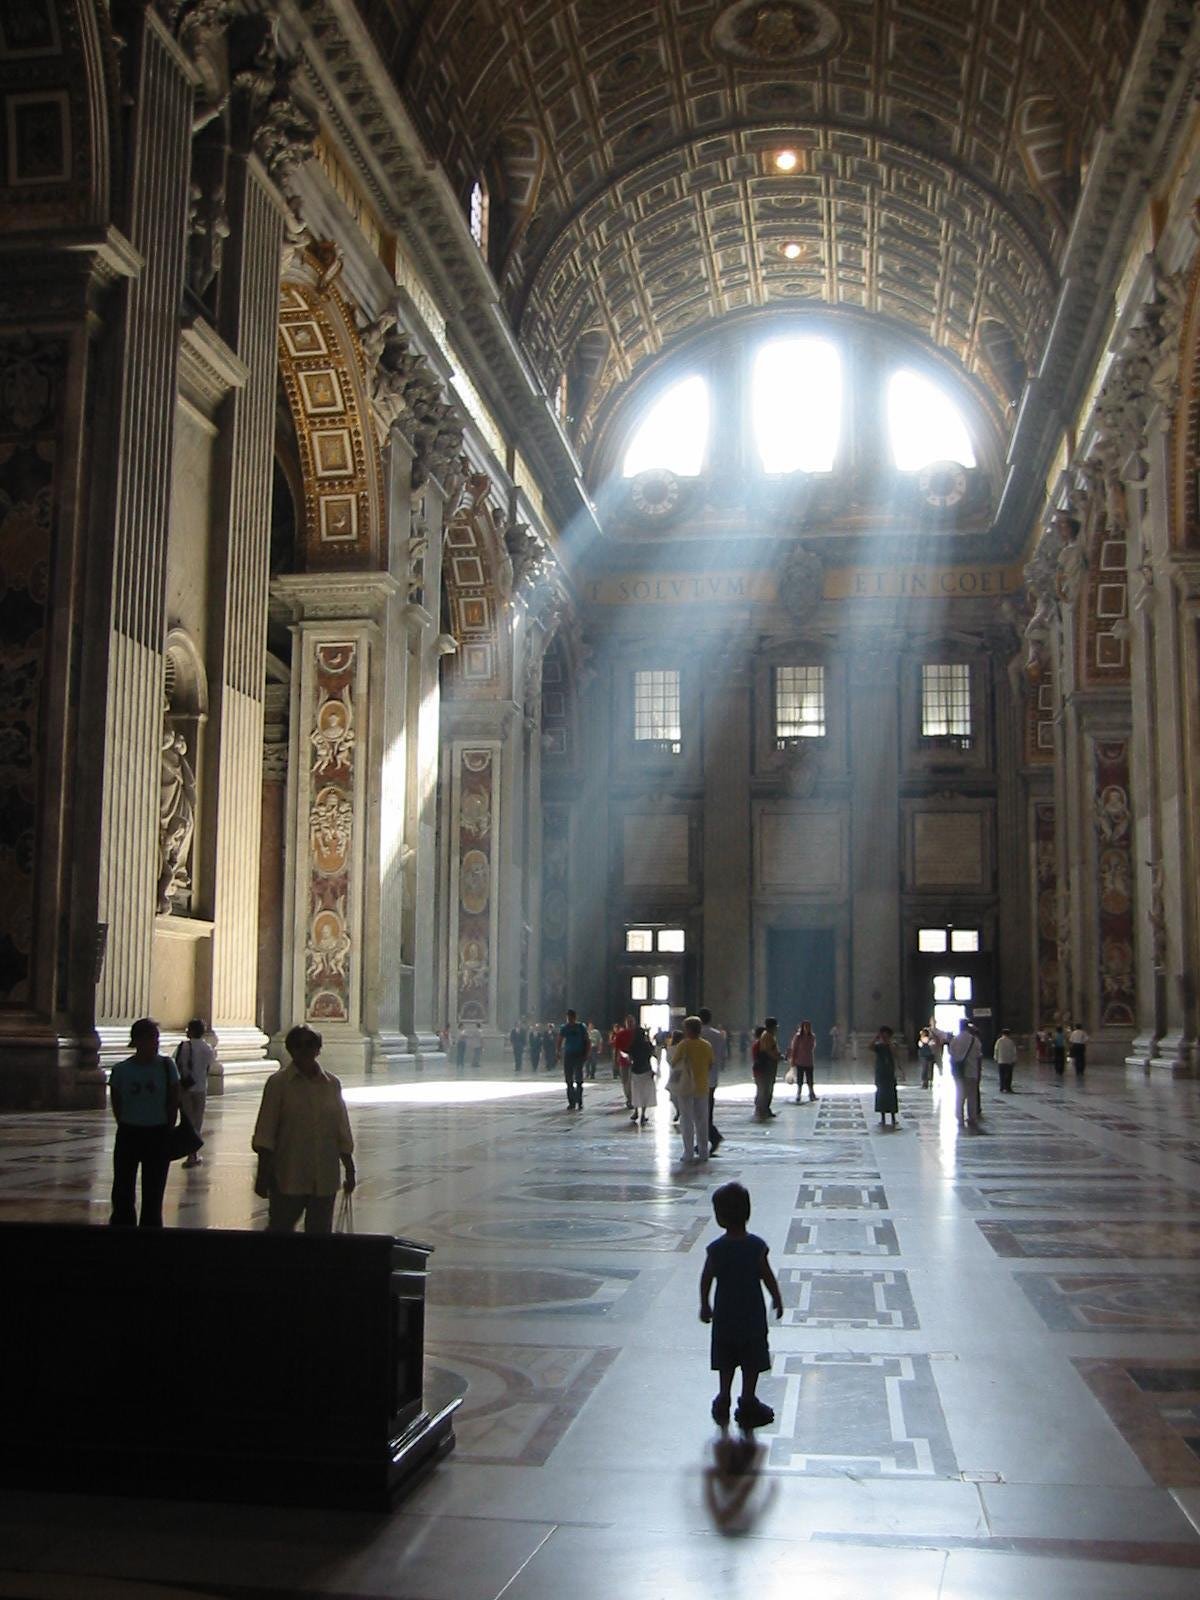 Light streaming into St Peter's Basillica, Vatican City, Rome, Italy. Photo by Jeb.